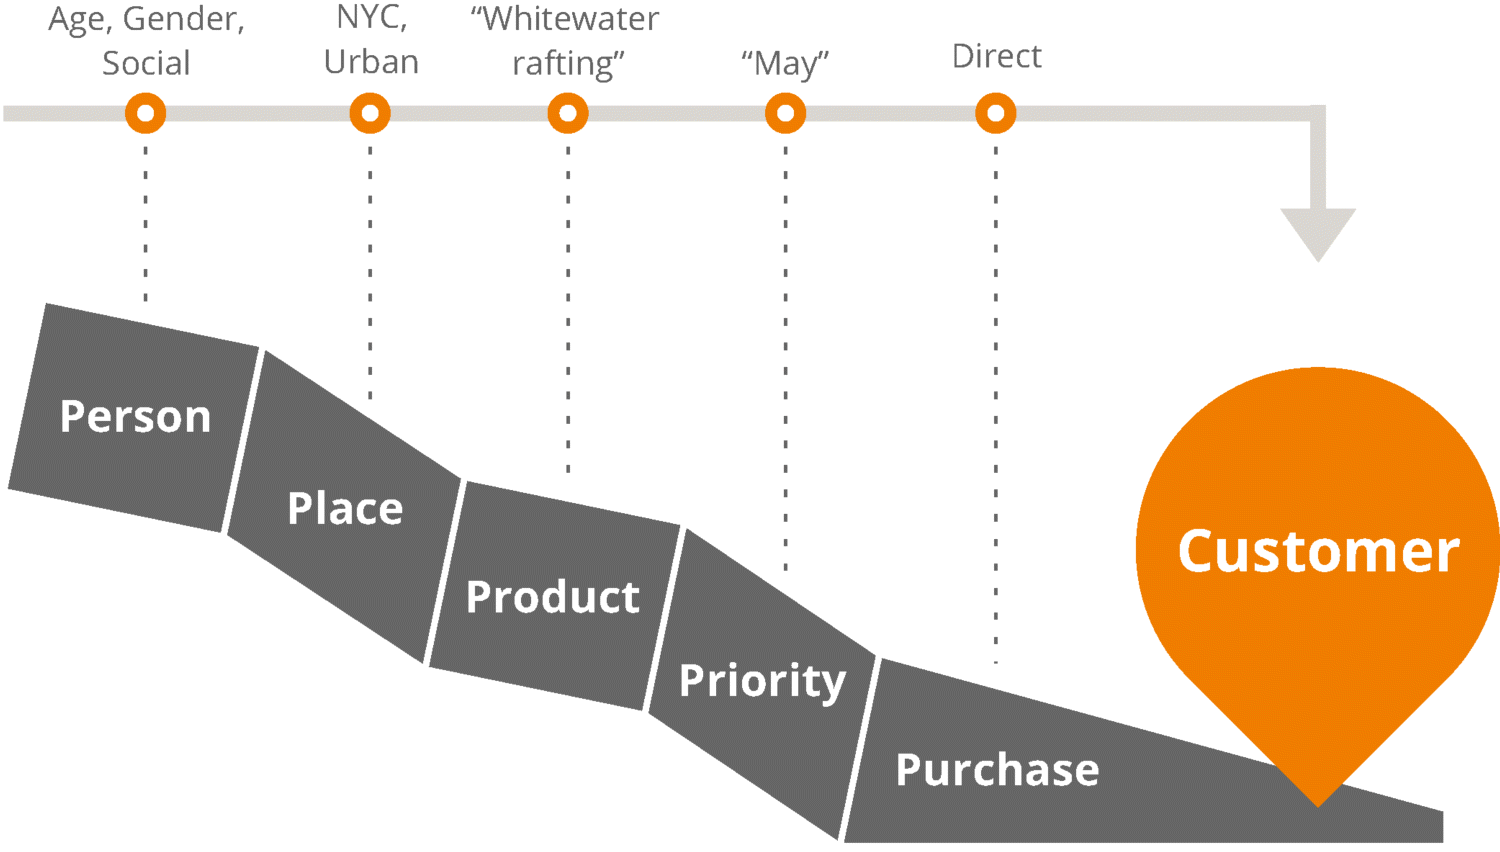 Figure depicting the 5P framework comprising person, place, product, priority, and purchase. A horizontal arrow spans across the 5P framework and points downward at customer. Corresponding to each component of 5P framework is a dot on the arrow. Dot corresponding to person is age, gender, and social; to place is NYC Urban; to product is whitewater rafting; to priority is May; and to purchase is direct